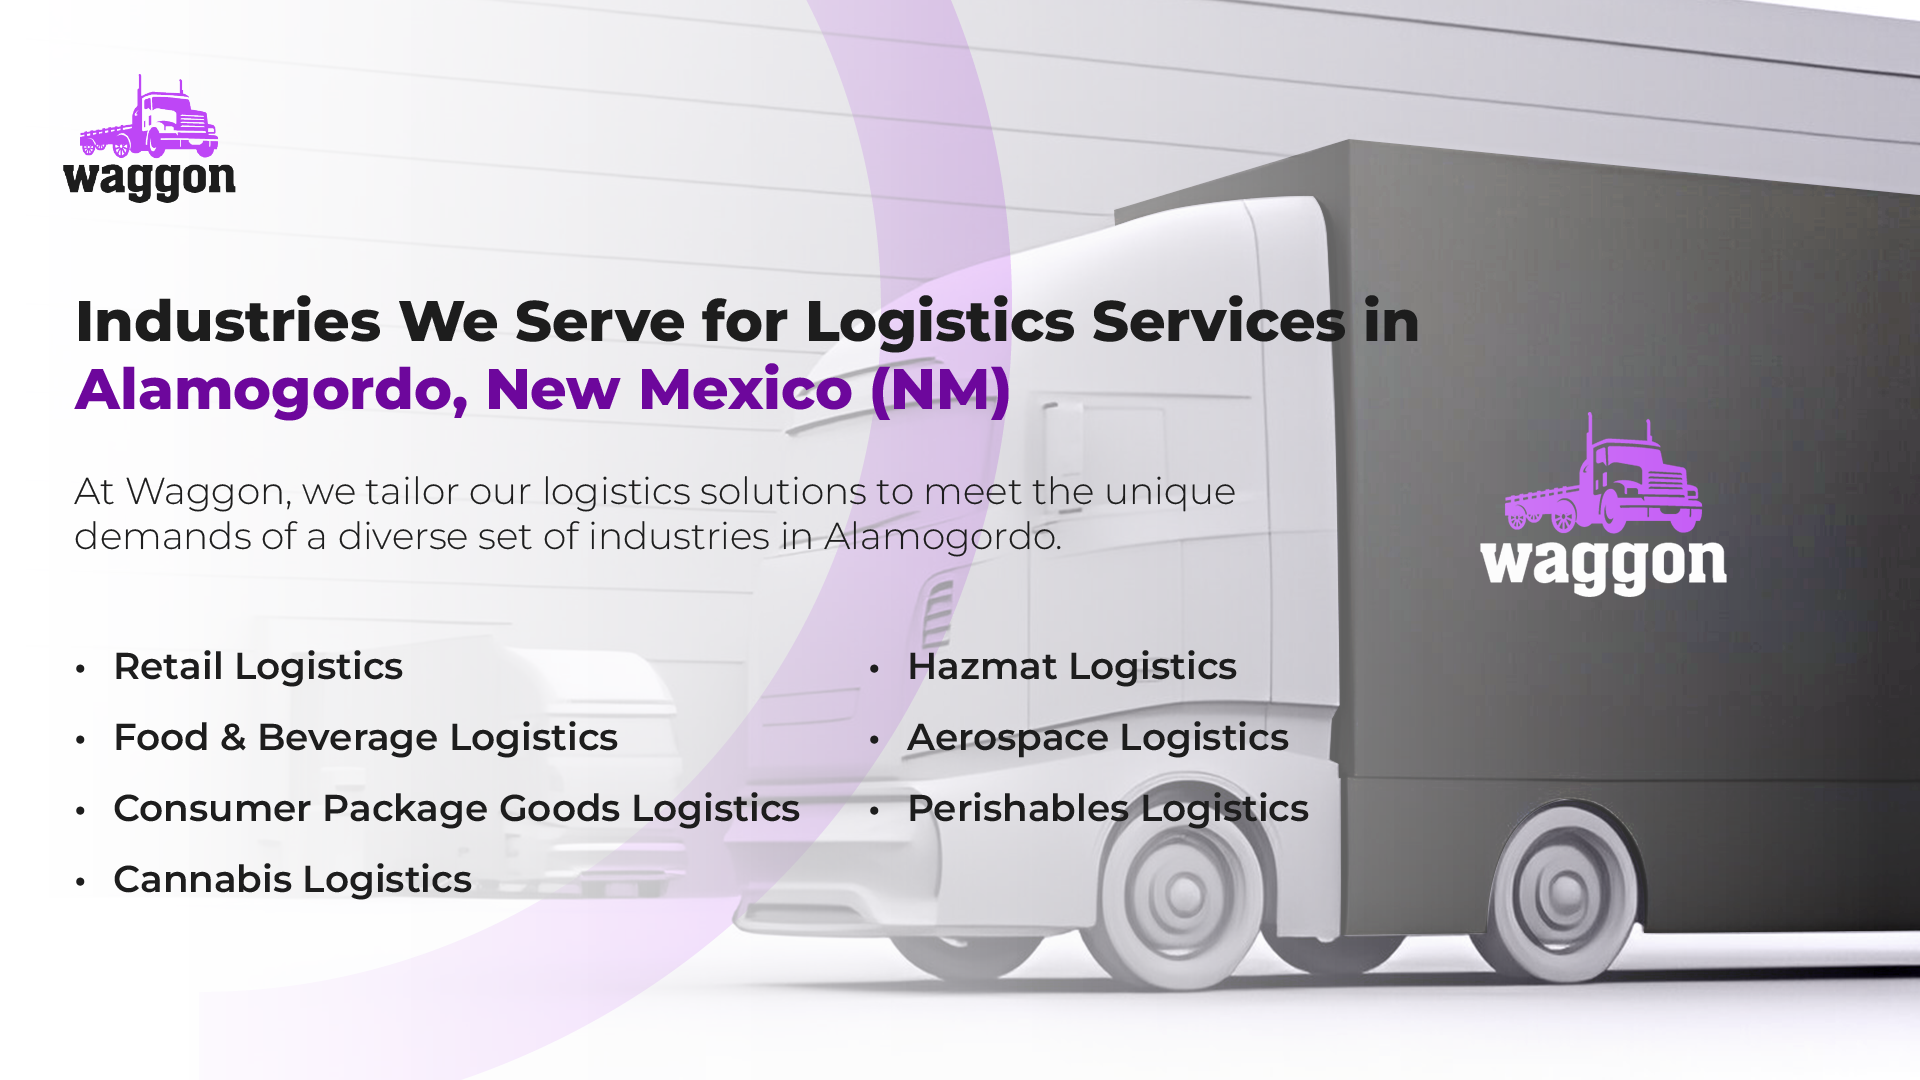 Industries We Serve for Logistics Services in Alamogordo, New Mexico (NM)